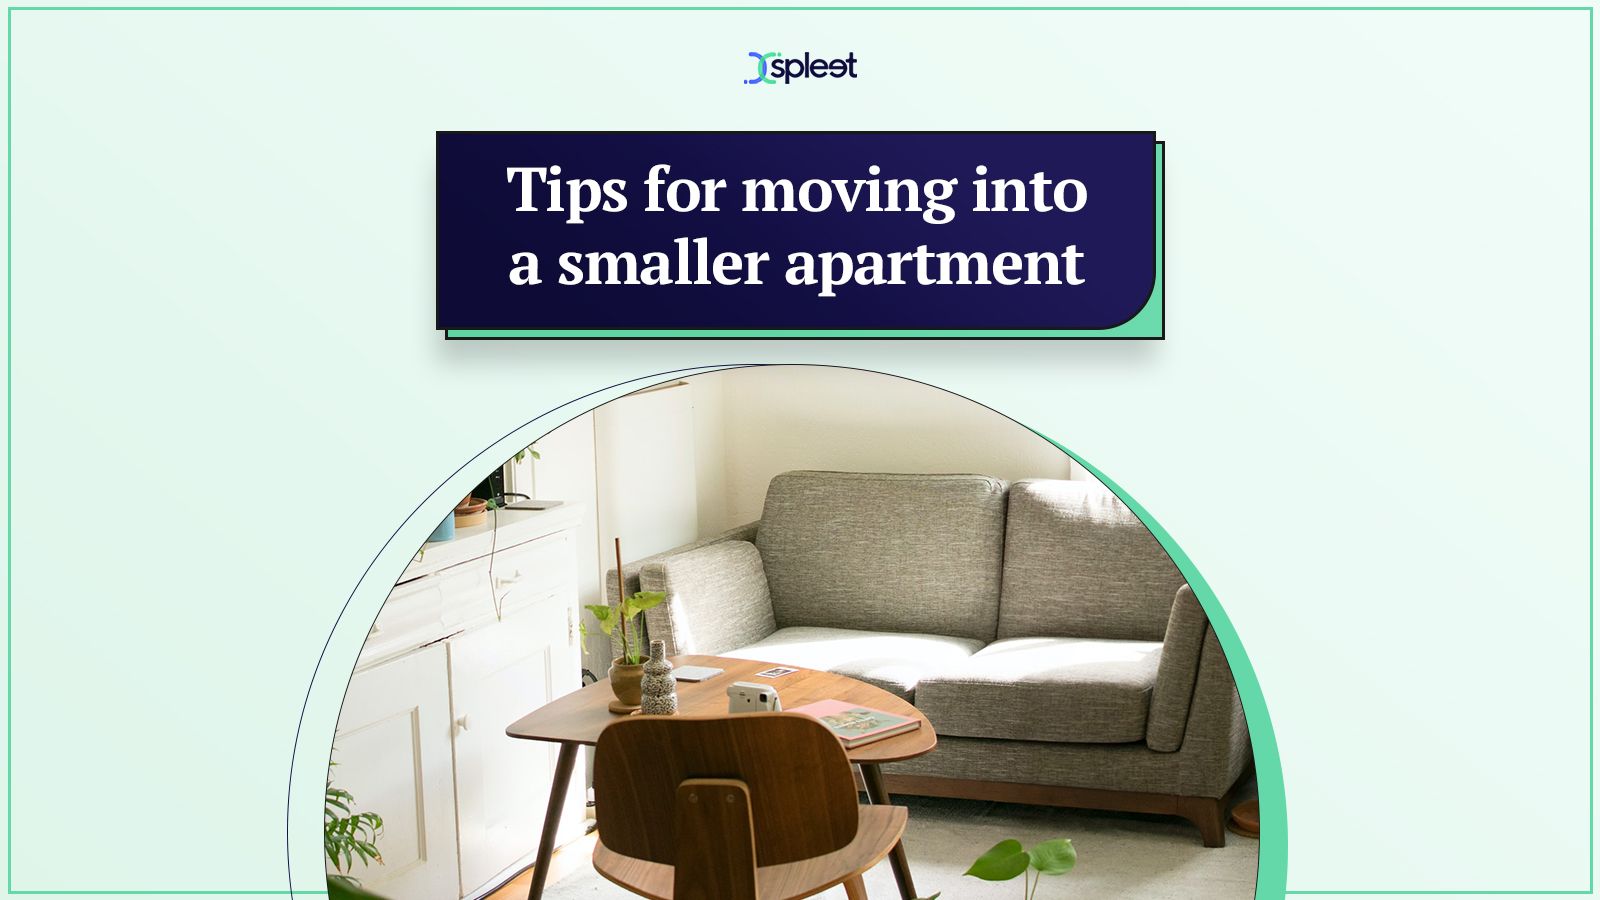 Tips for moving into a smaller apartment